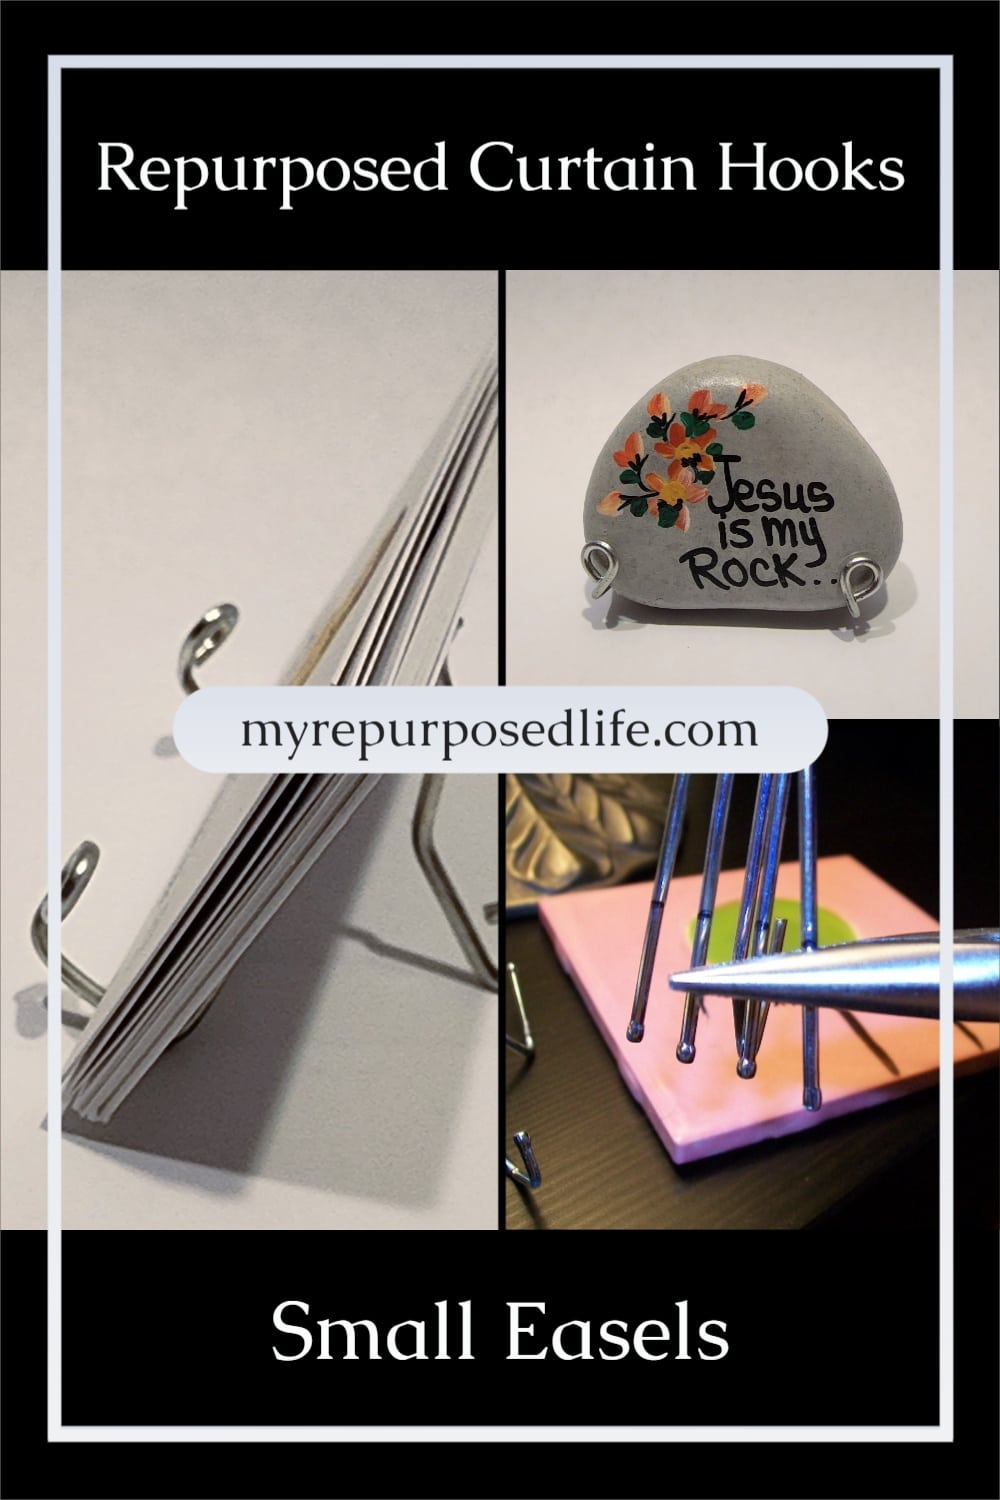 Drapery hooks repurposed into small easels, perfect for biz cards, small plaques, cd covers and more. Step by step directions. #myrepurposedlife #upcycle #curtainhooks #draperyhooks #diy #easels #display via @repurposedlife